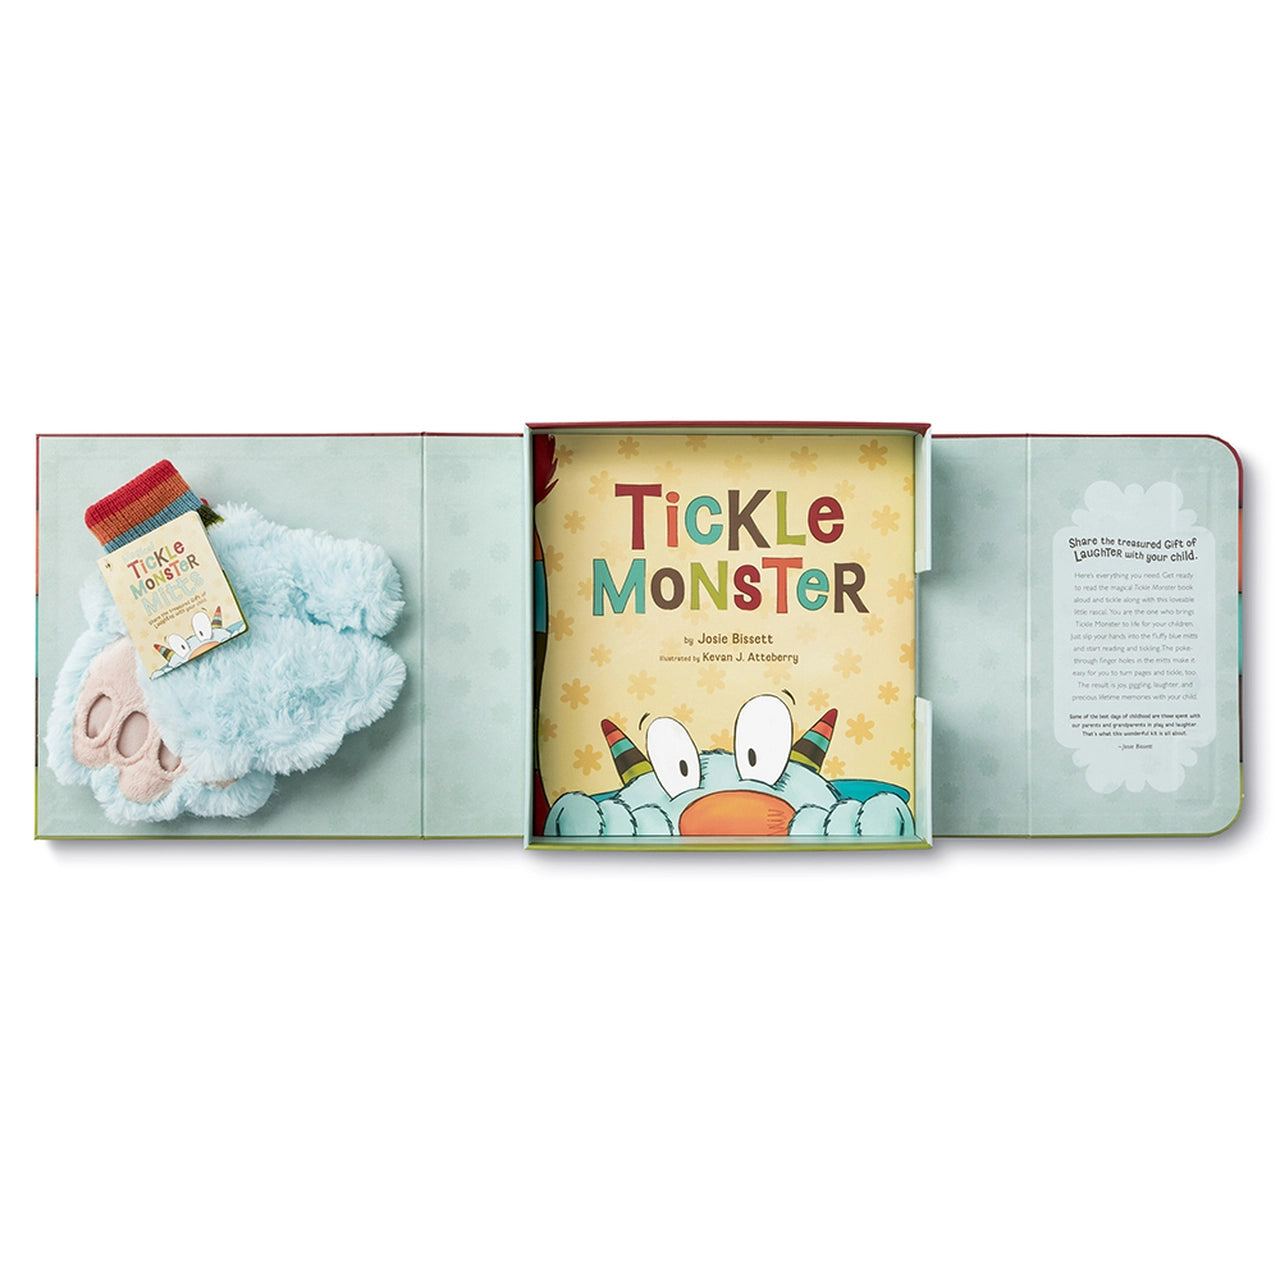 Book (Hardcover) - Tickle Monster Laughter Kit